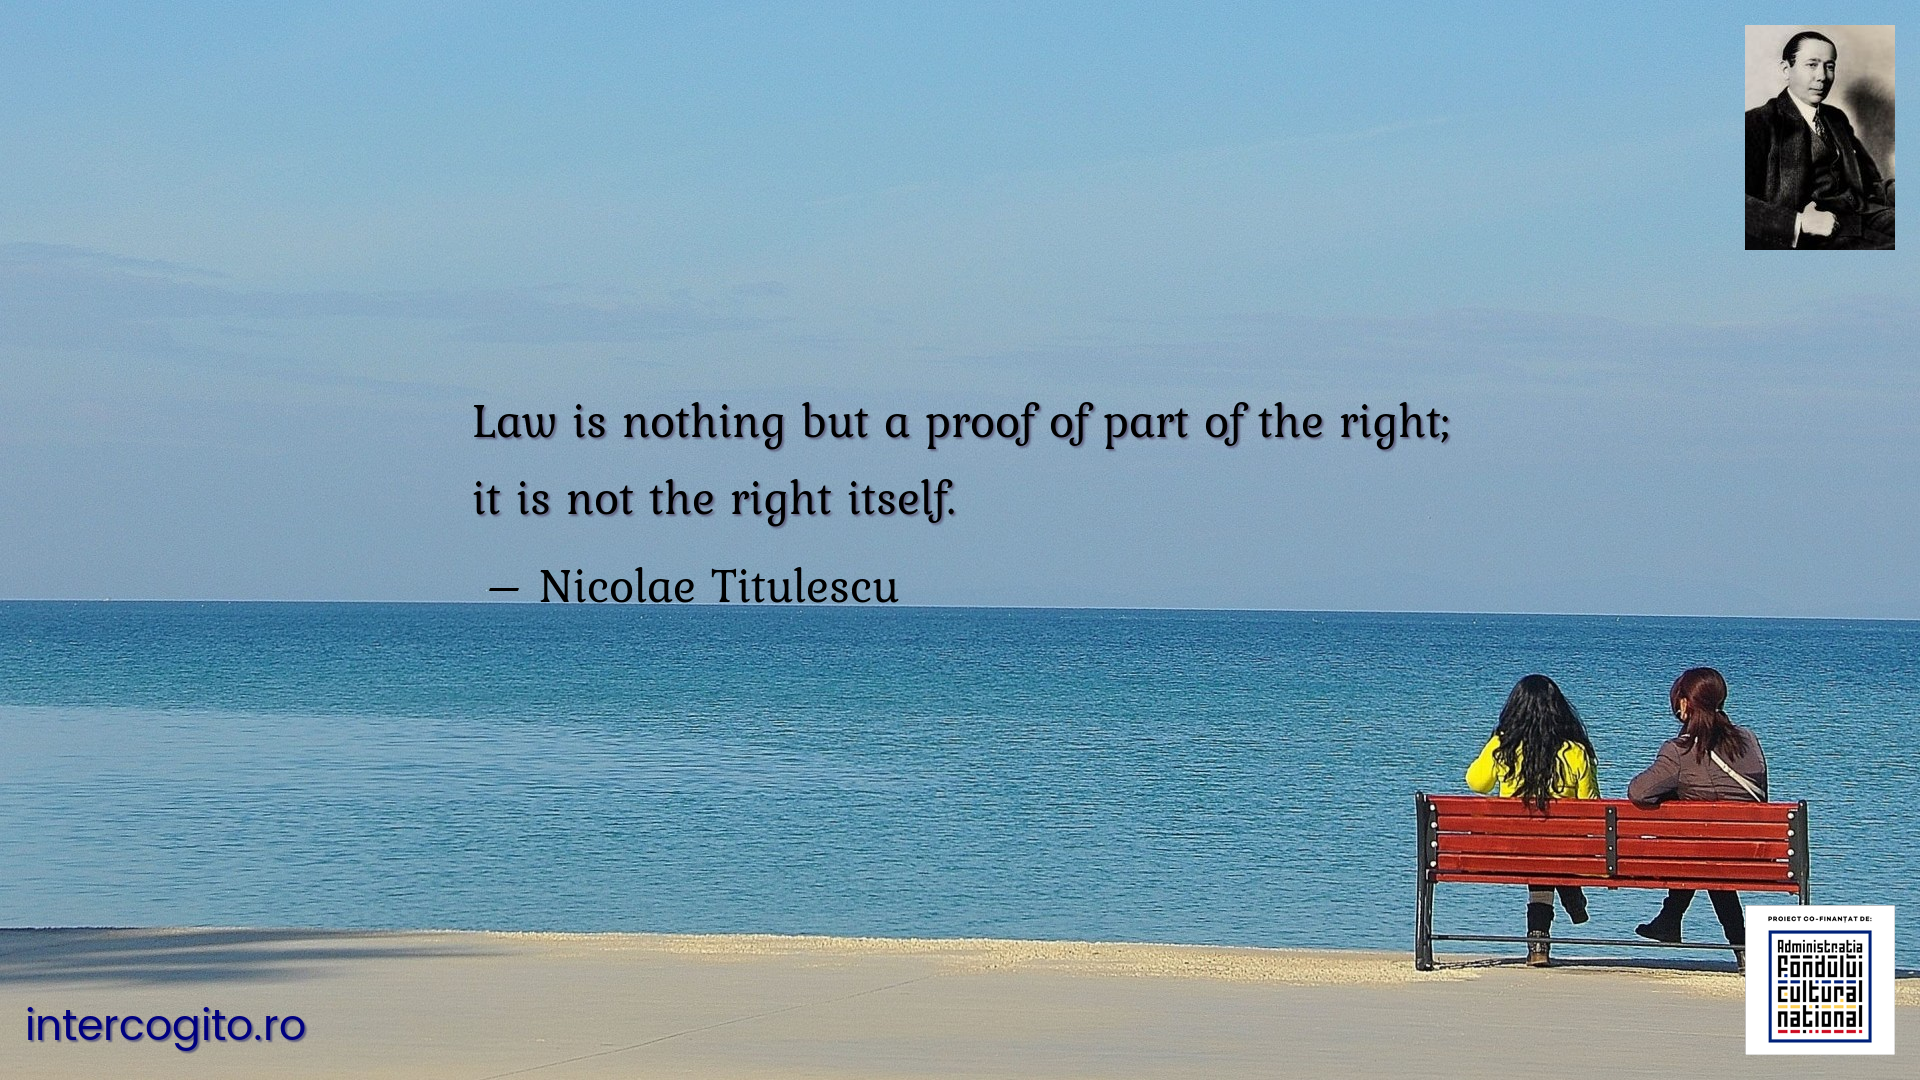 Law is nothing but a proof of part of the right; it is not the right itself.